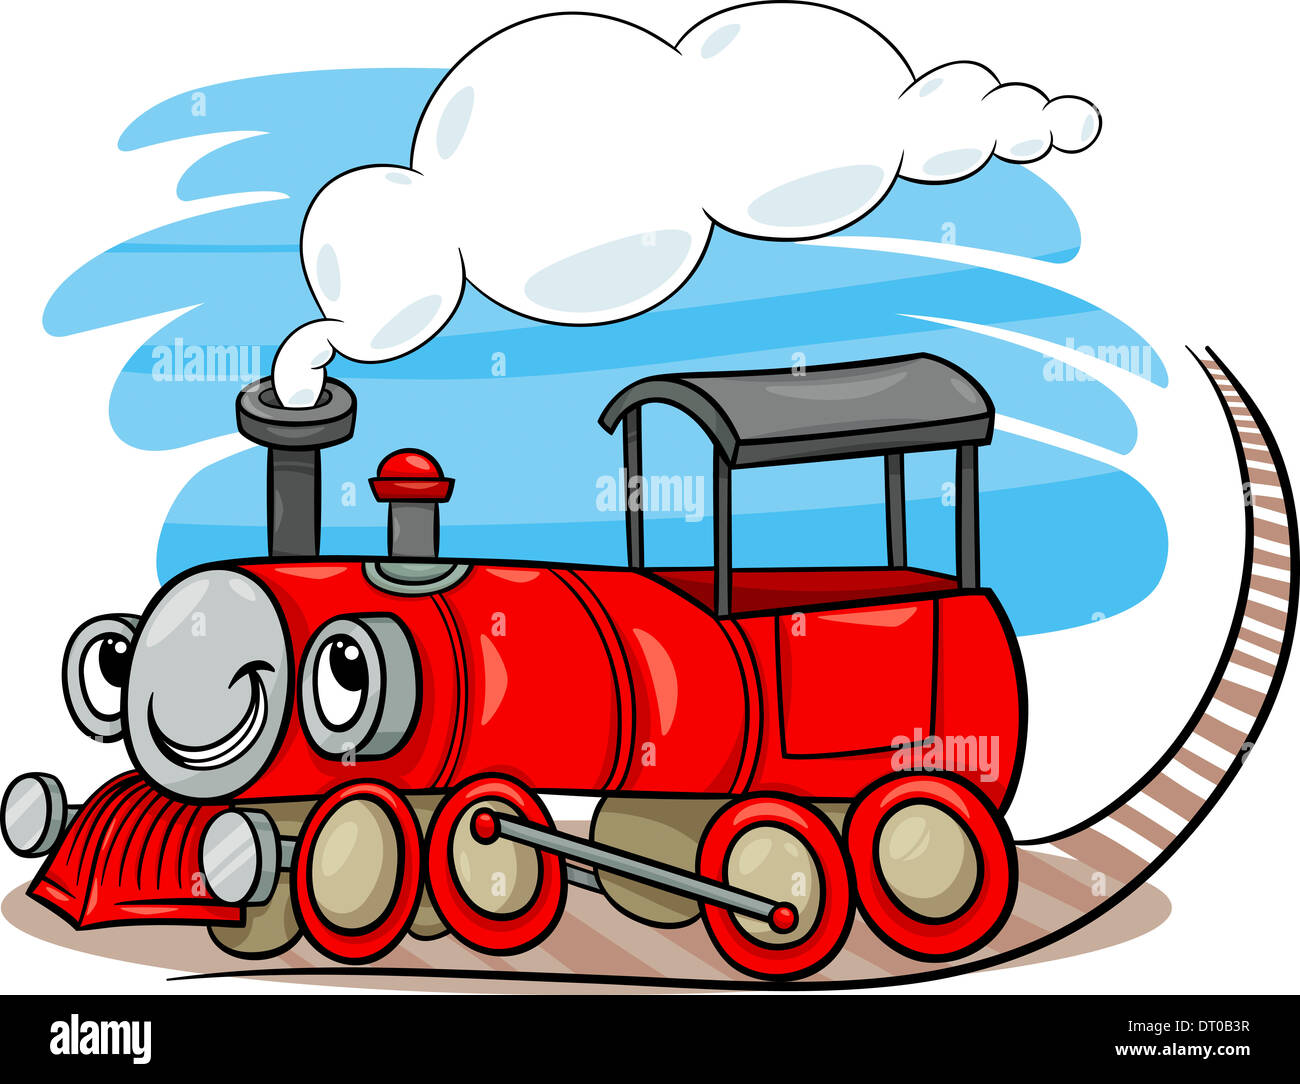 Cartoon Illustration of Funny Steam Engine Locomotive or Puffer Belly Train  Transport Character Stock Photo - Alamy